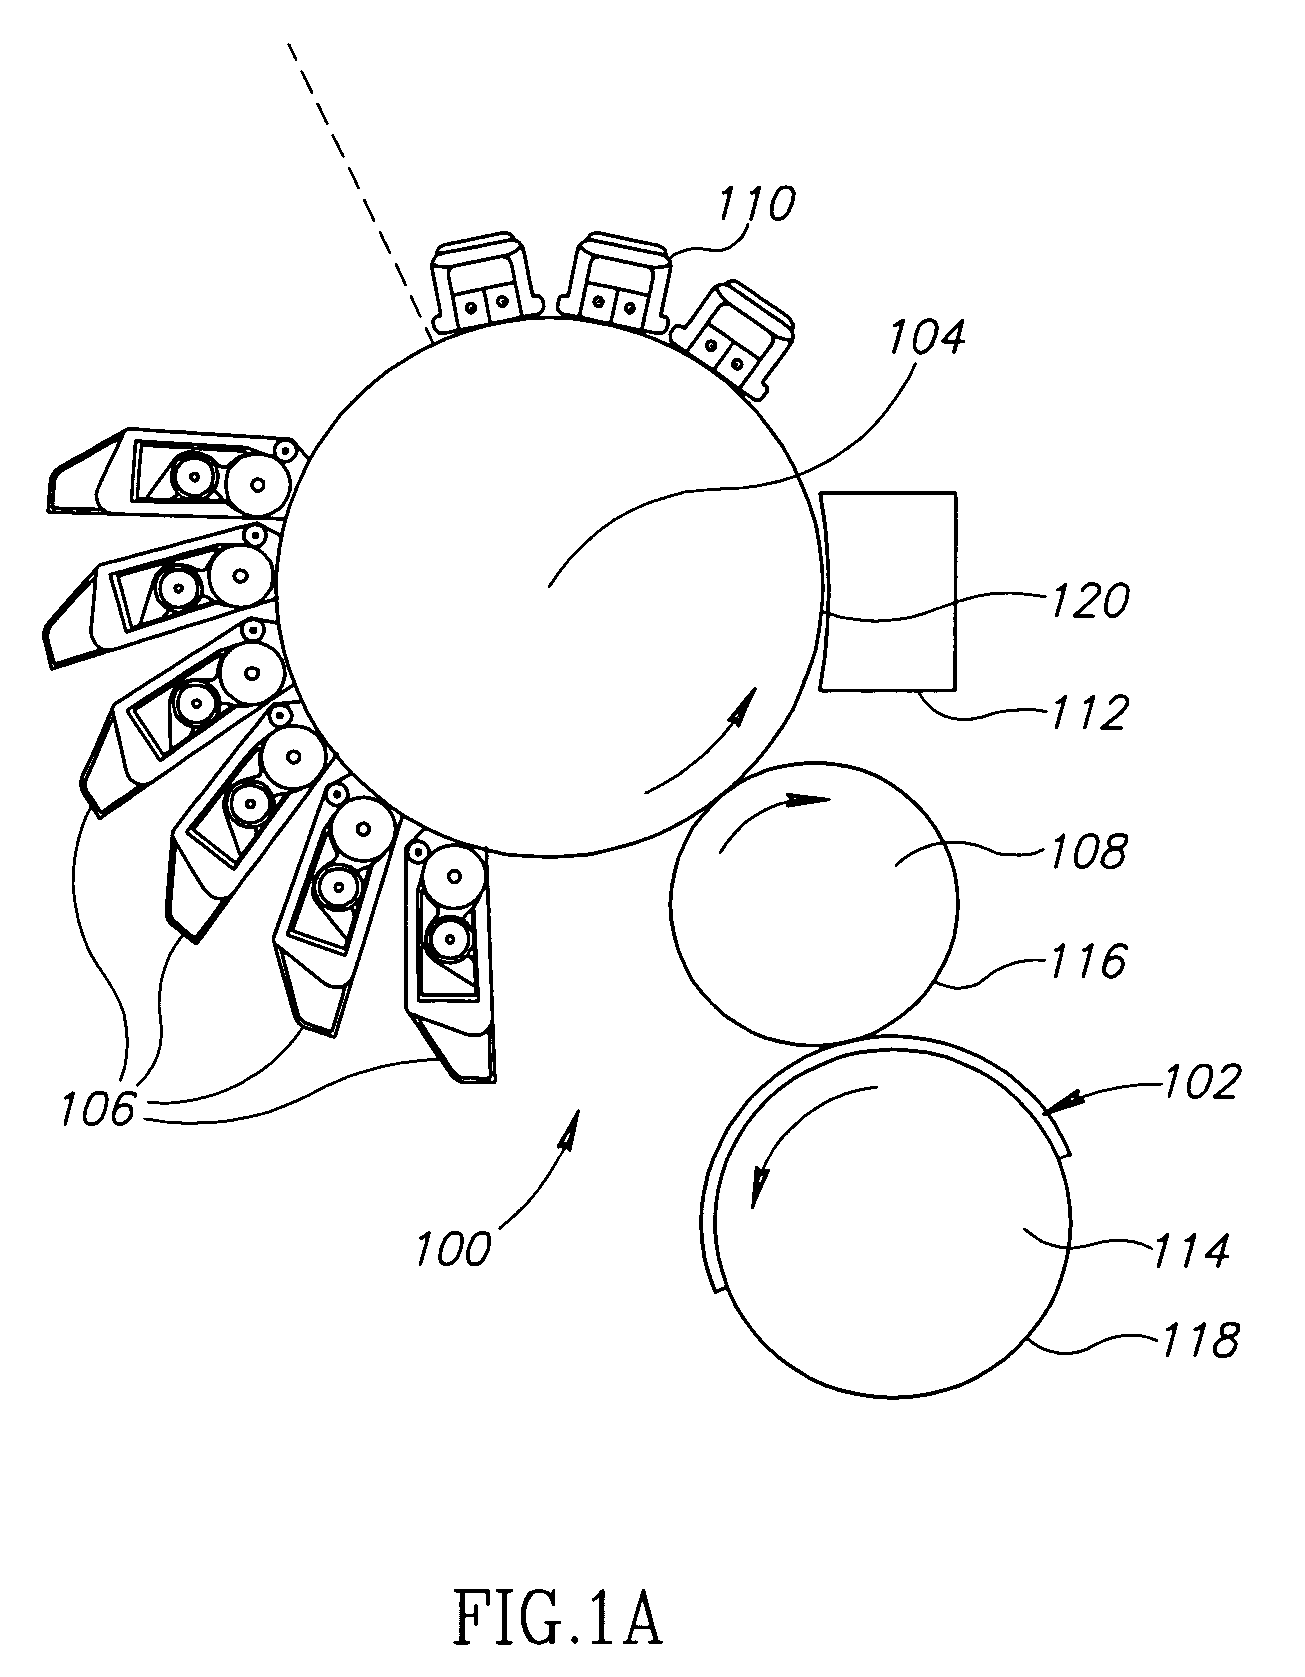 Print blankets for use in electro-statographic printing and methods of using same